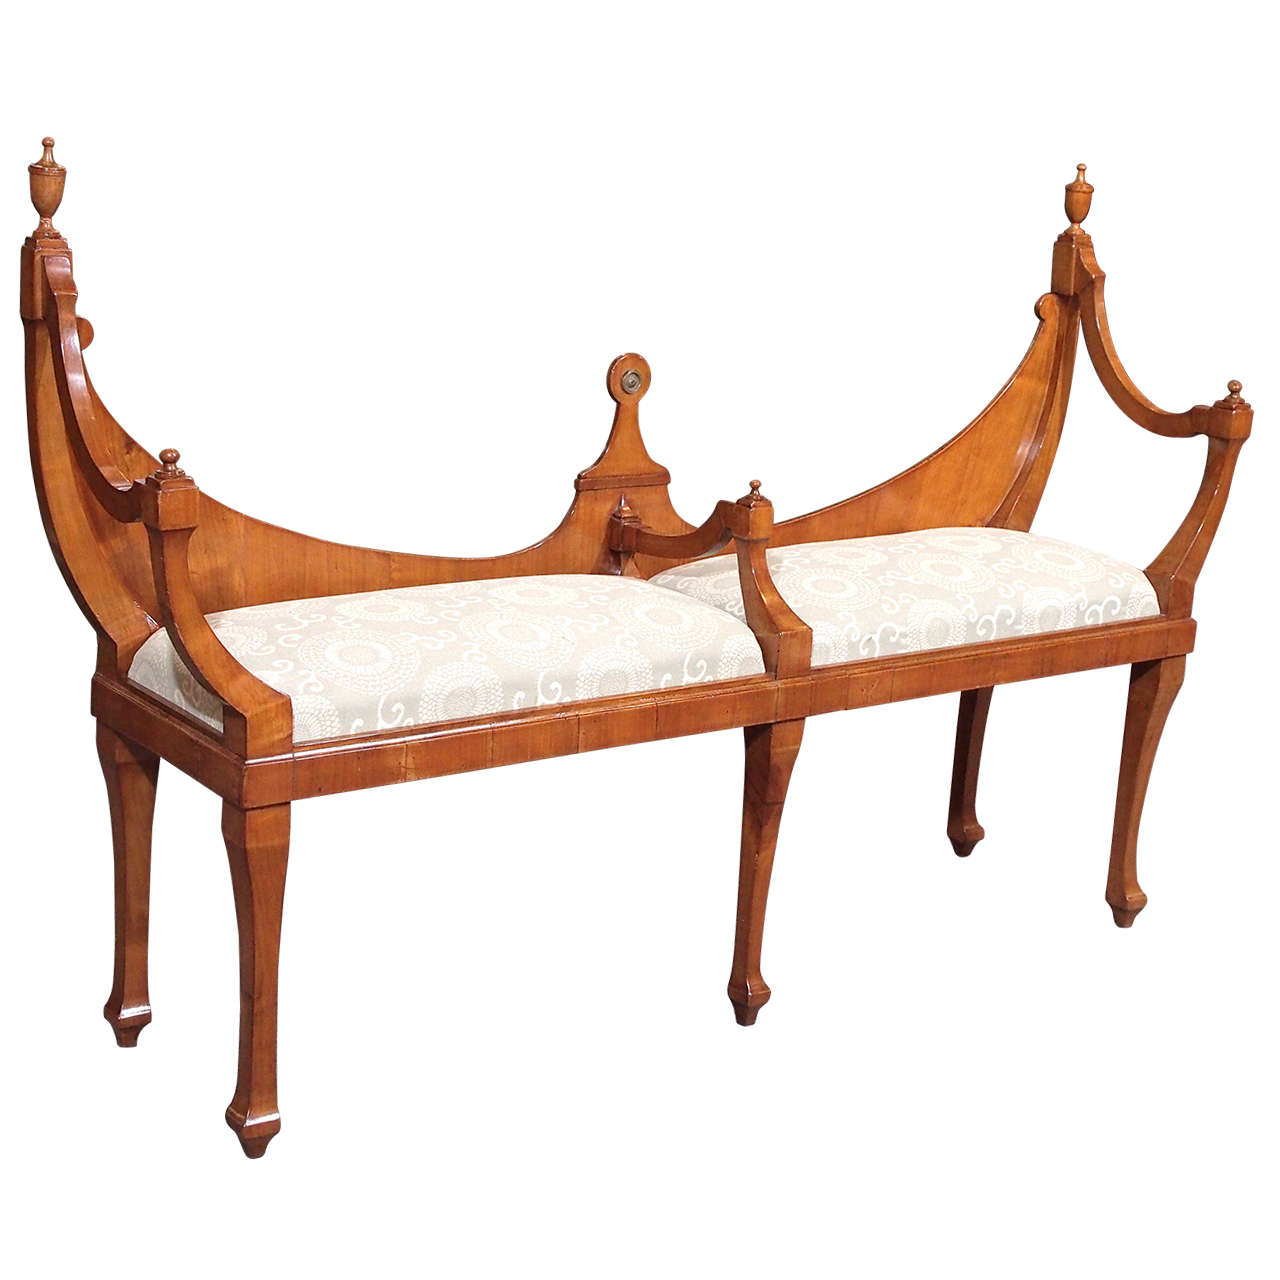 Old English Hepplewhite Style "Courting Bench" in Walnut